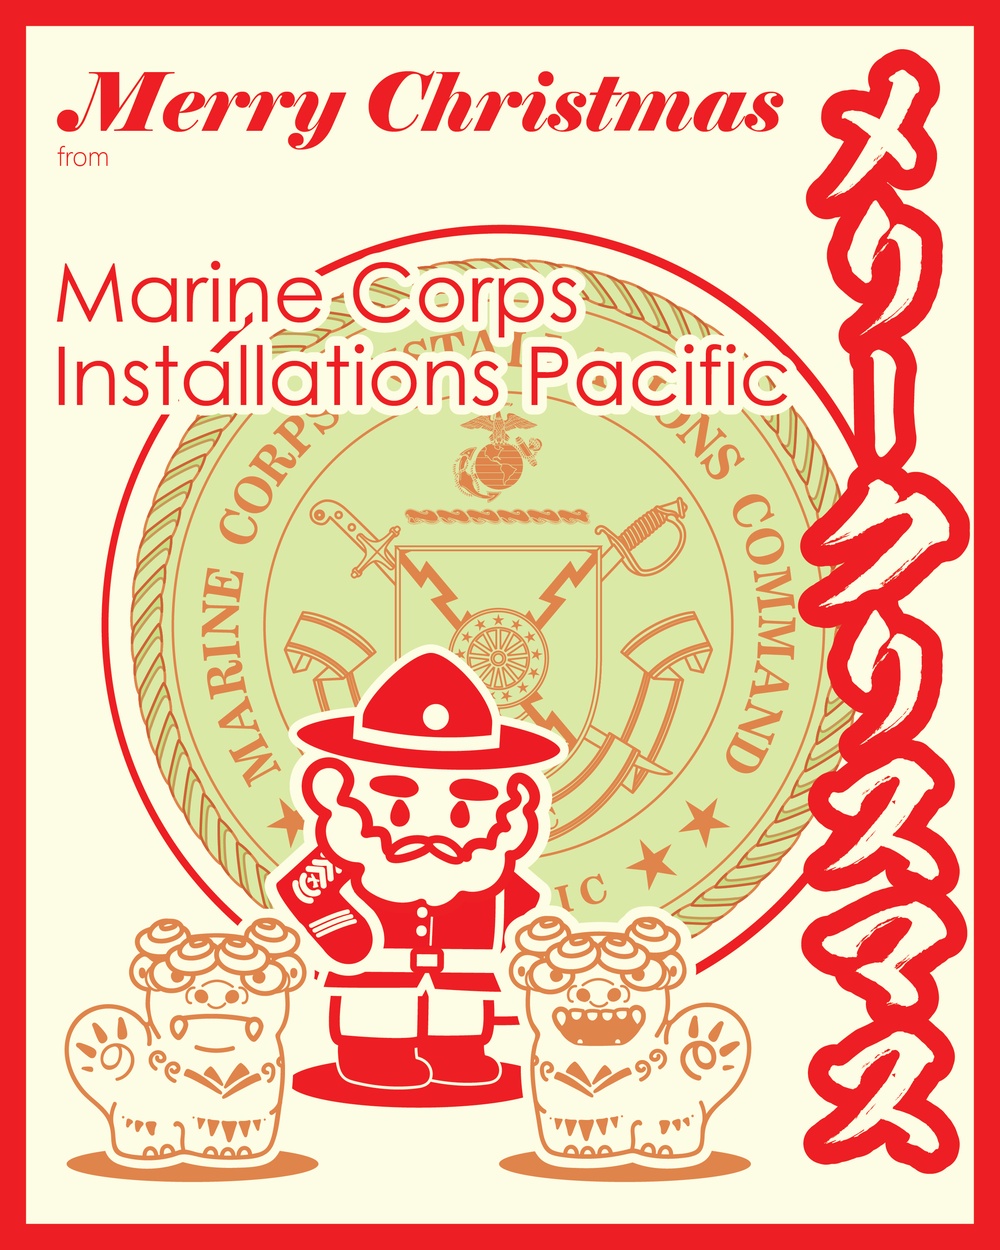 Merry Christmas from Marine Corps Installations Pacific